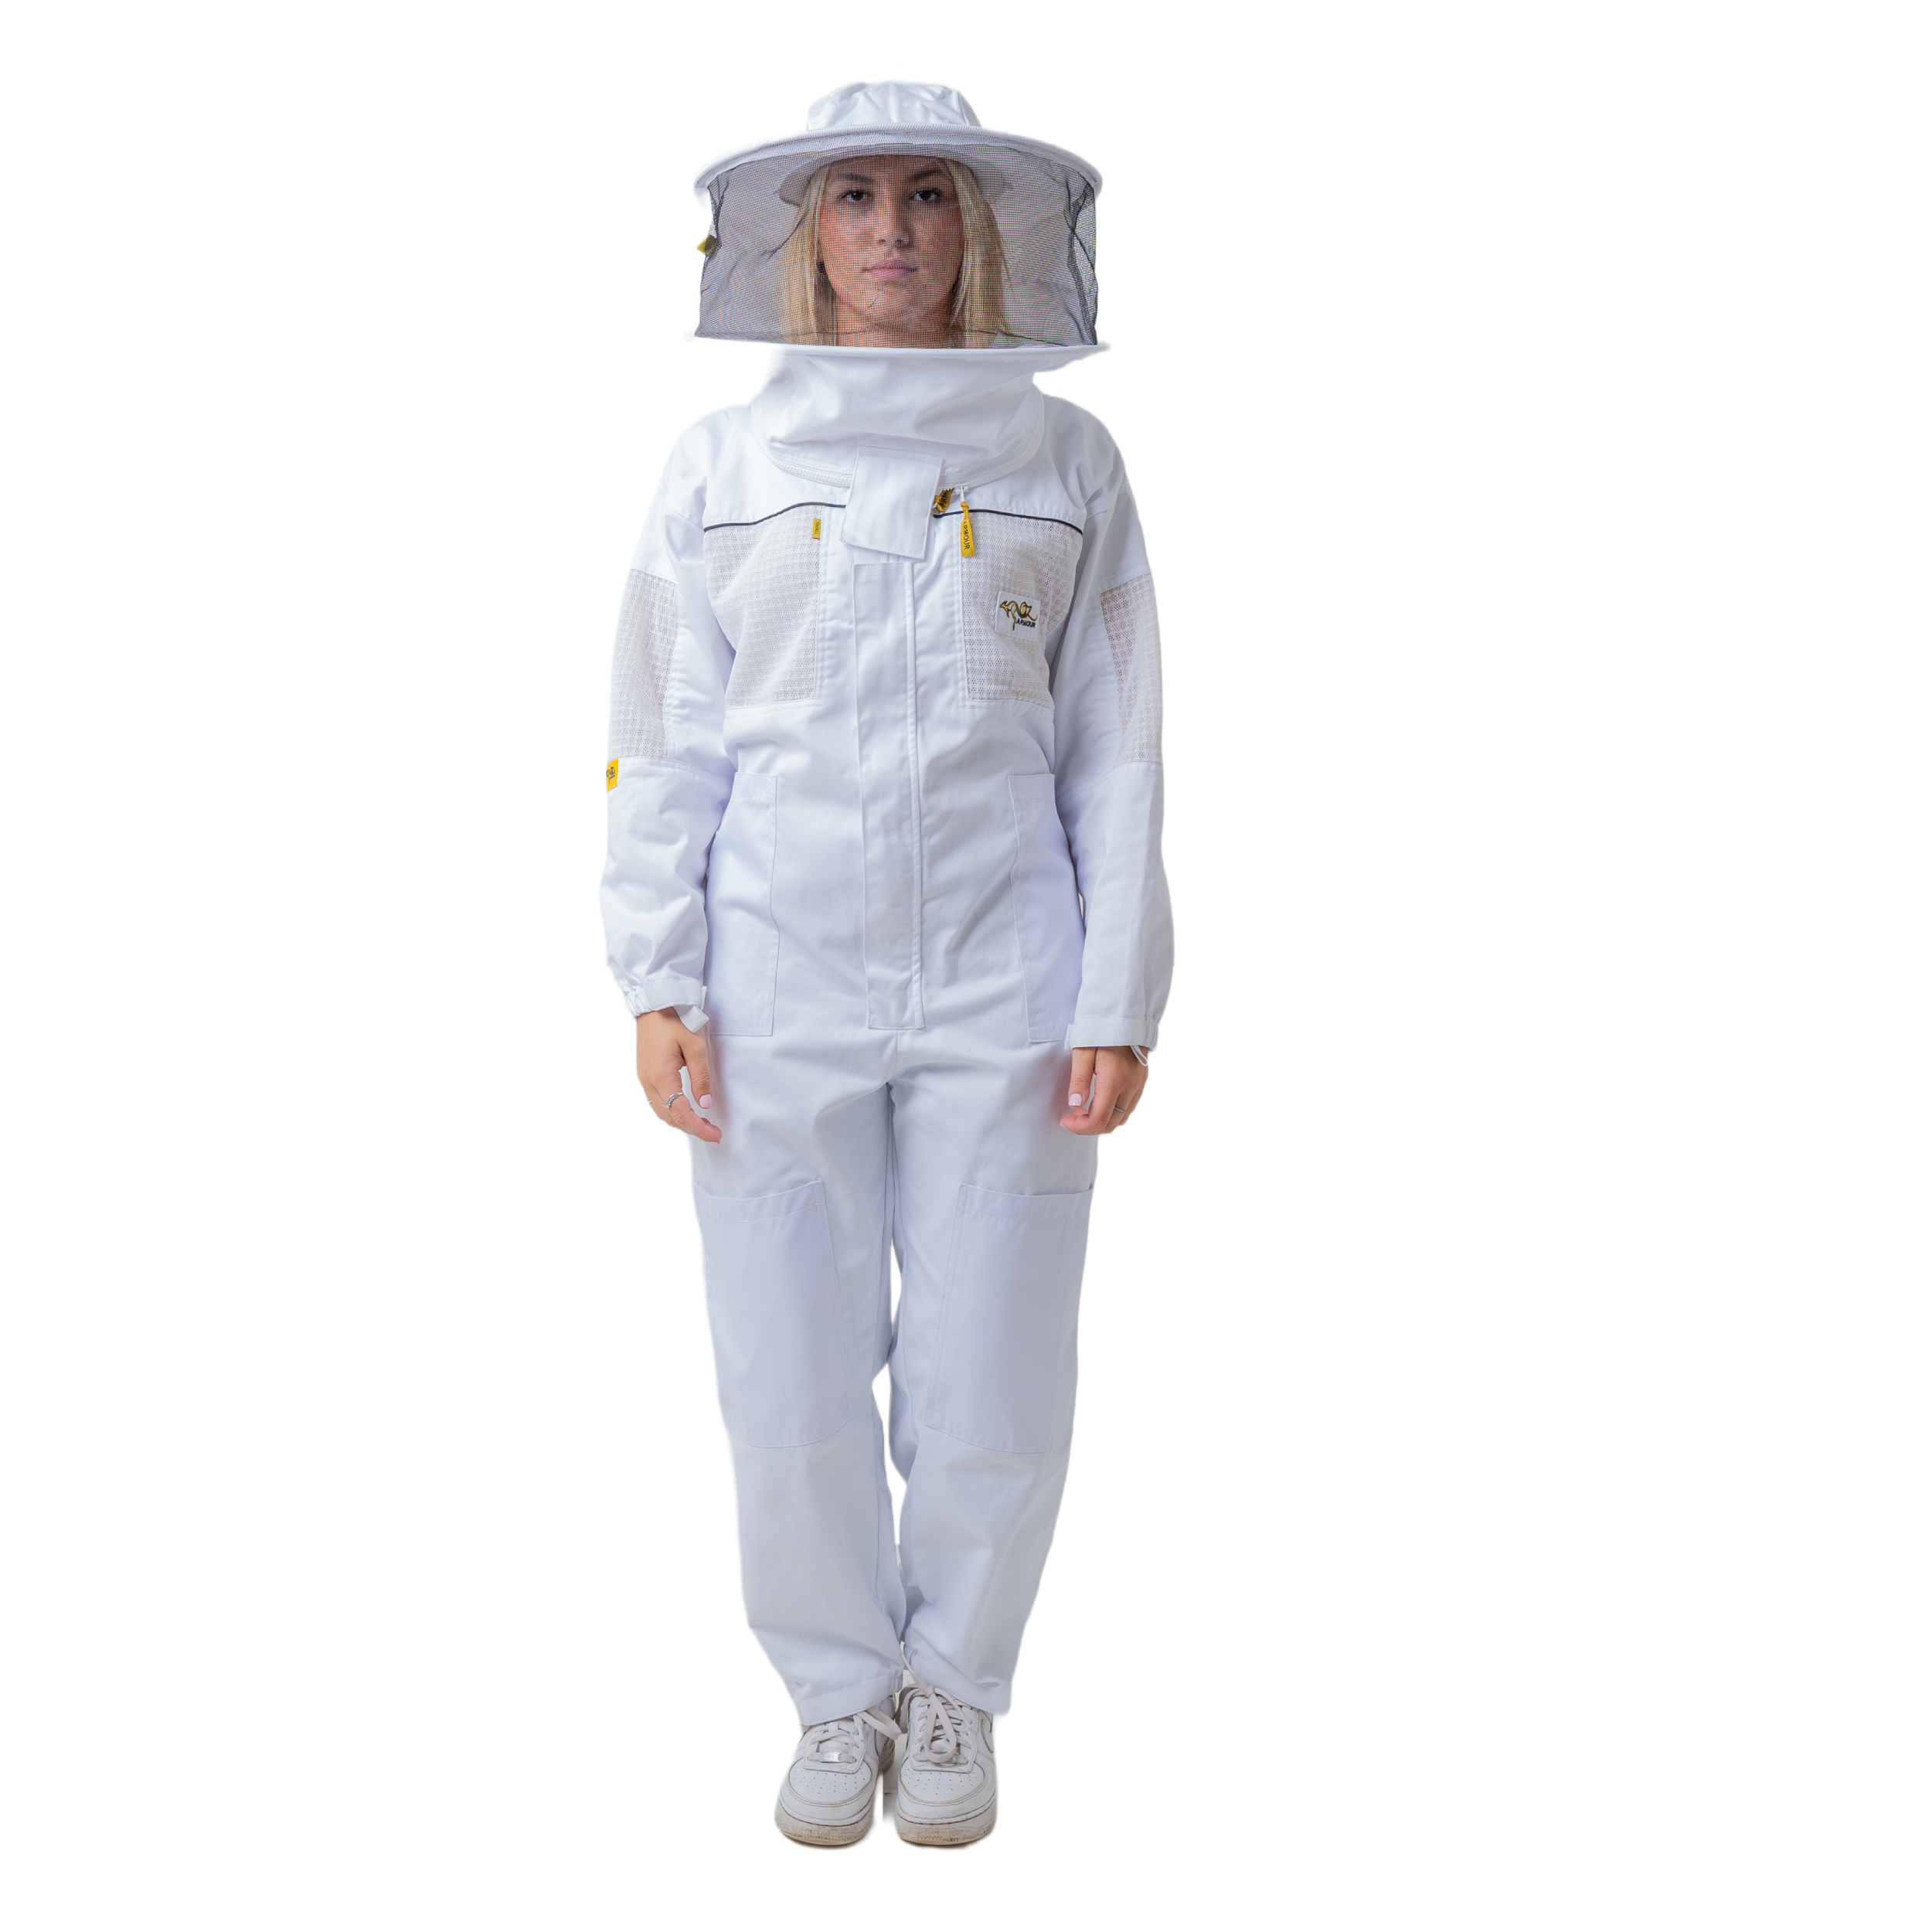  Semi Ventilated Beekeeping Suit With Round Brim Hat - Front View